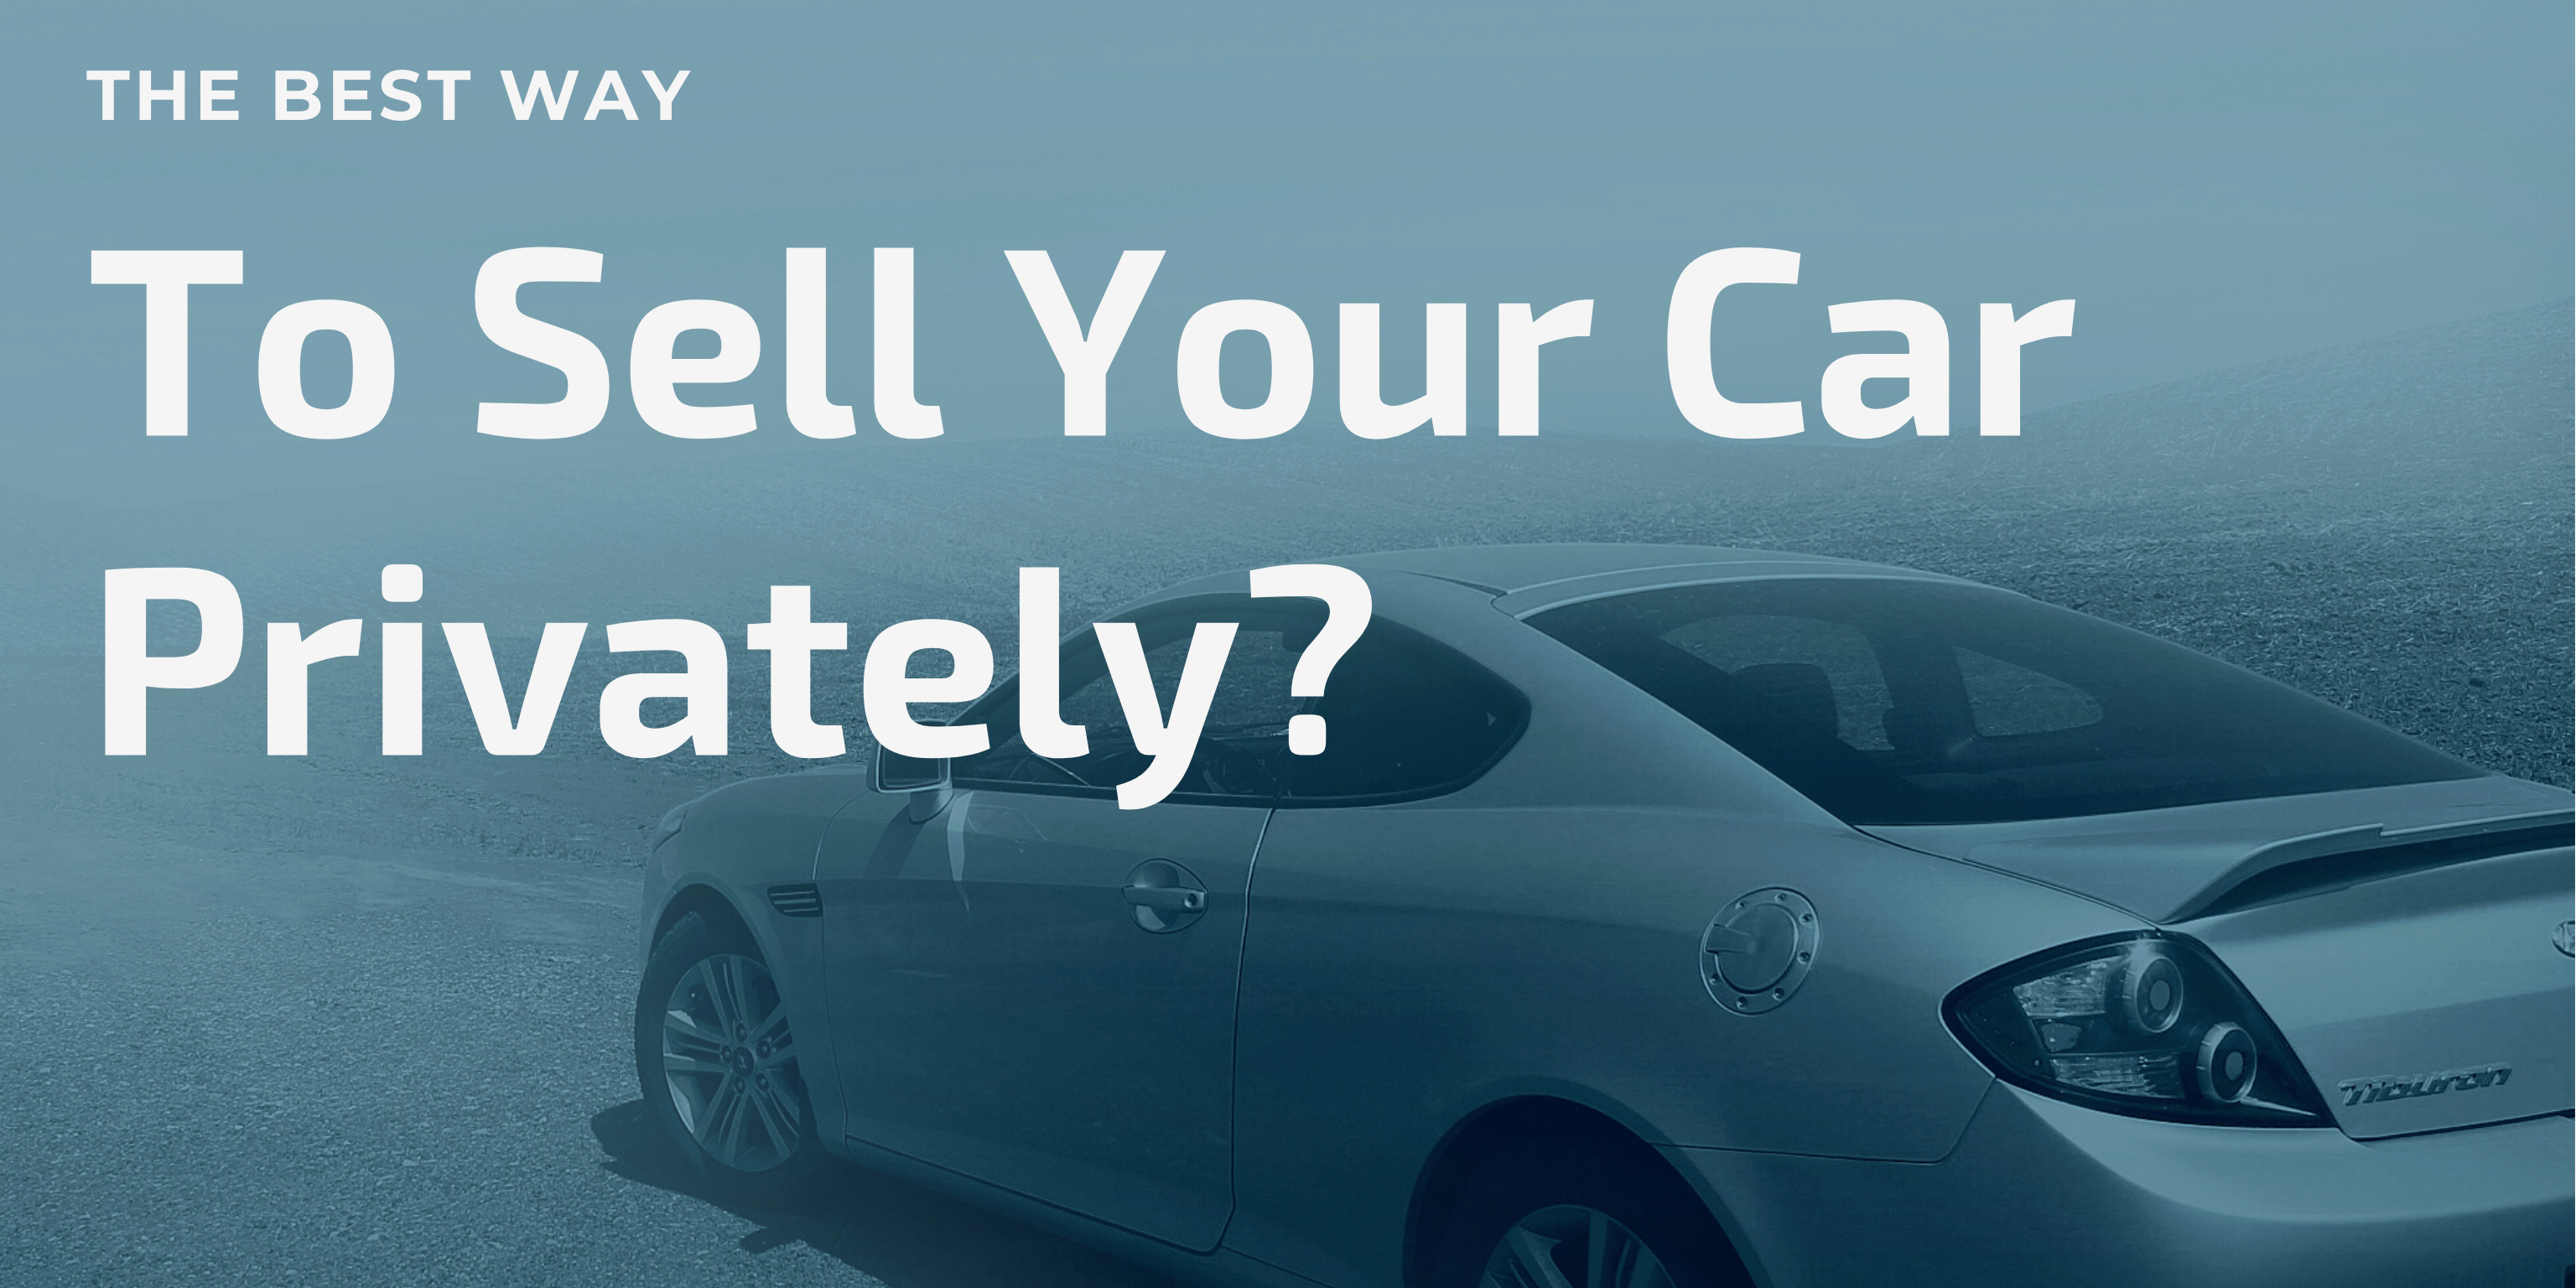 What Is The Best Way To Sell Your Car Privately in New York?